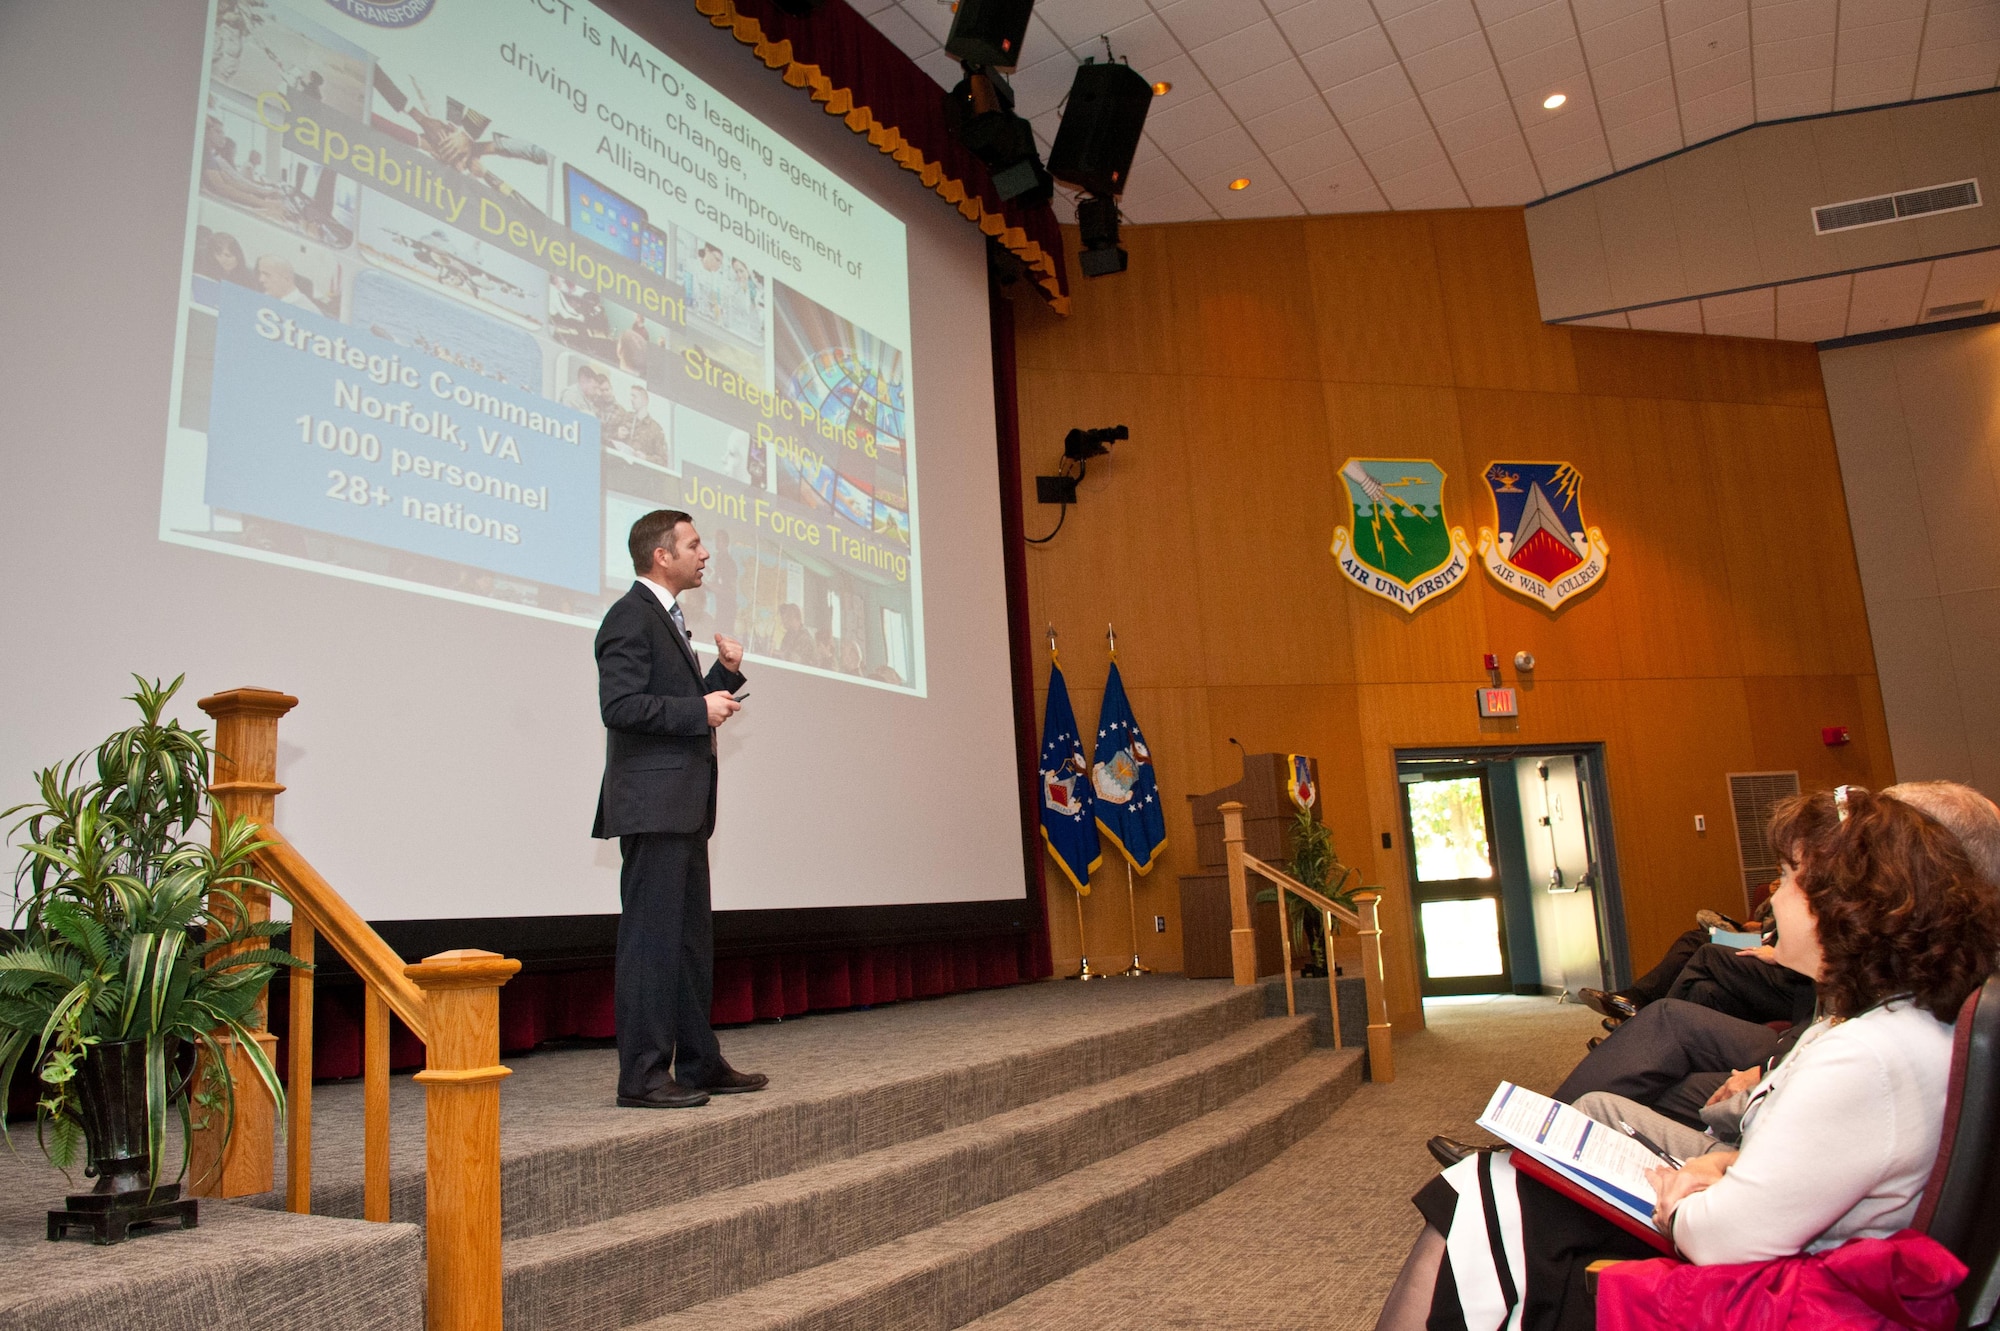 Serge Da Deppo, North Atlantic Treaty Organization Transformation Command, Future Solutions Branch, discusses NATO's online worldwide cross cultural expert network during the second annual Air University Language, Regional Expertise and Culture Symposium on Maxwell Air Force Base, Ala., March 29th, 2017. Member nations currently use the network to improve cultural understanding of regions they will be deployed by having moderators in one location to conduct online videoconferences with groups from two different nations. (US Air Force photo by Melanie Rodgers Cox/Released)